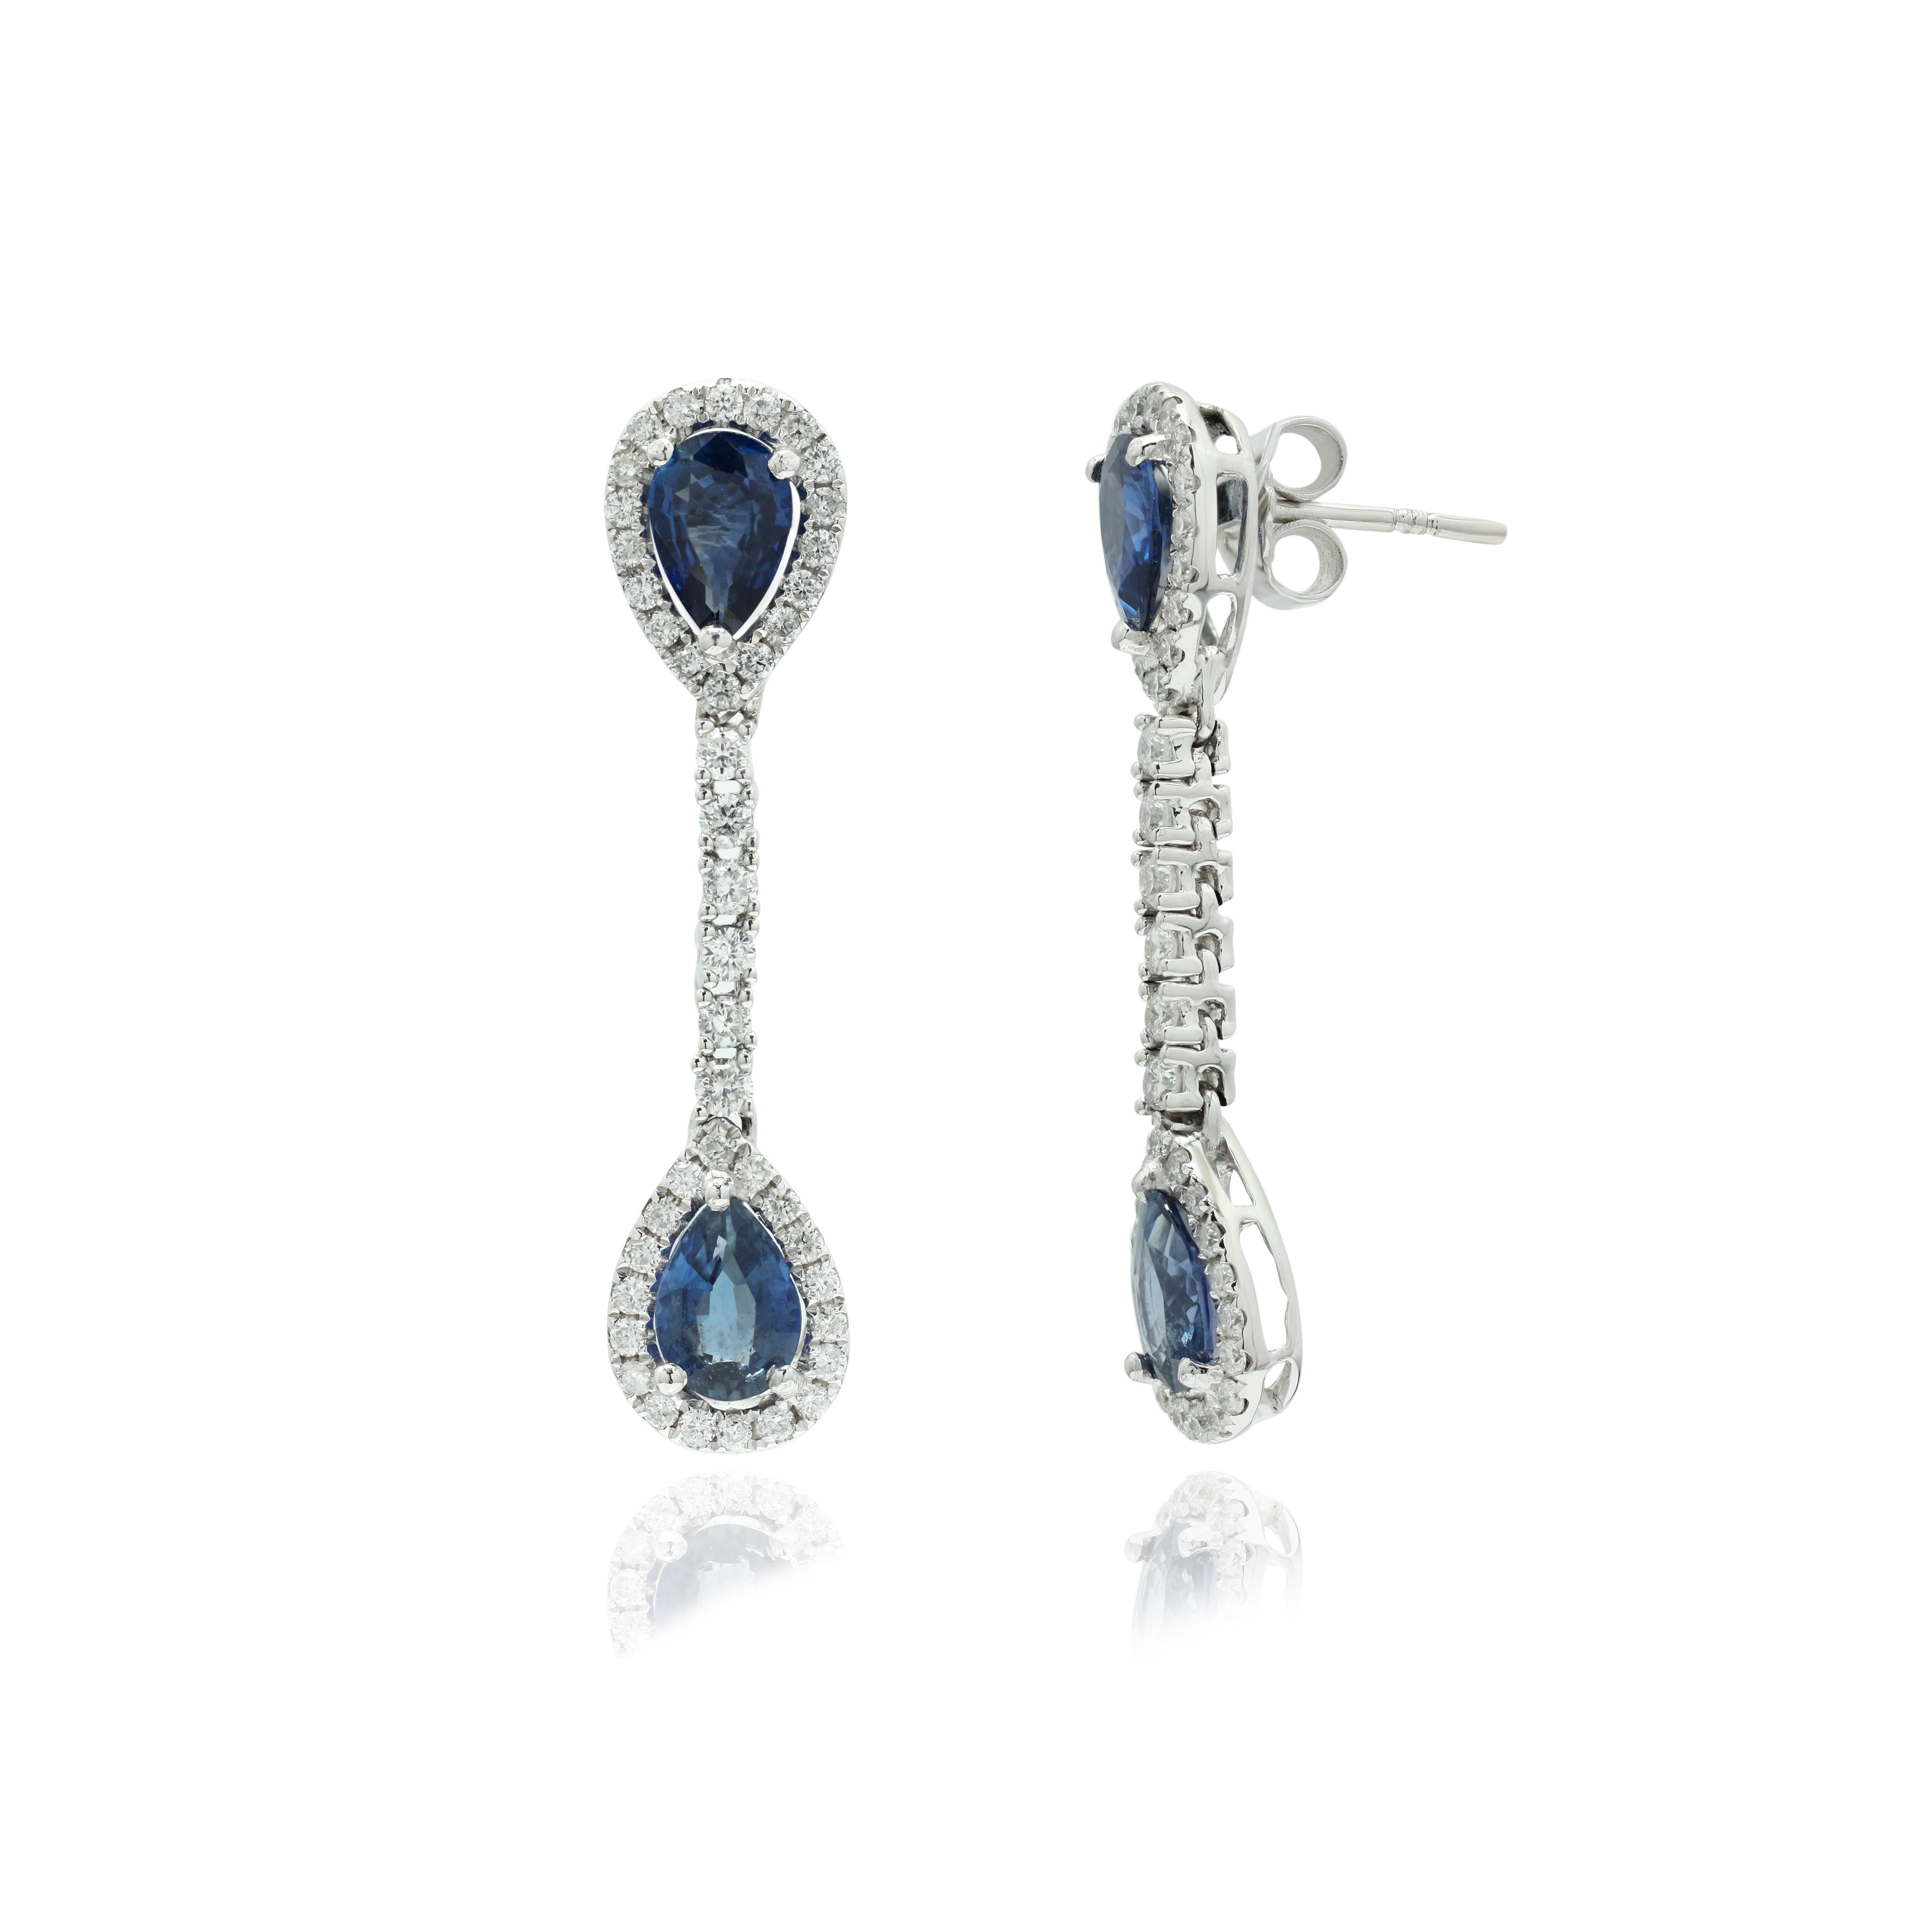 Blue Sapphire and Diamond Dangle Earrings to make a statement with your look. These earrings create a sparkling, luxurious look featuring pear cut gemstone.
If you love to gravitate towards unique styles, this piece of jewelry is perfect for